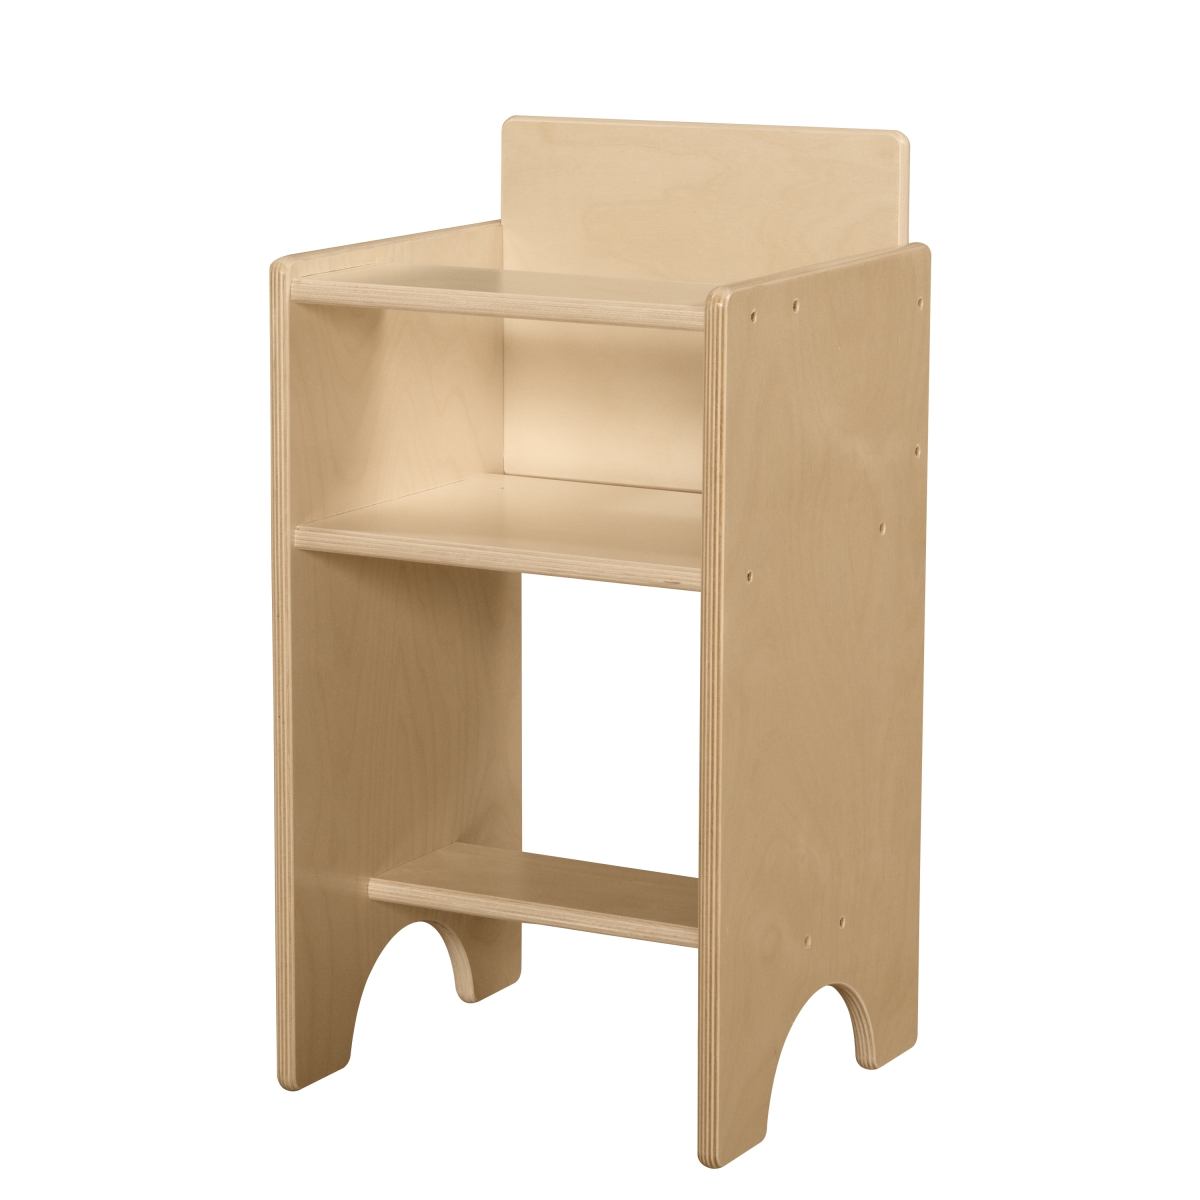 C81100 Doll High Chair With Rta